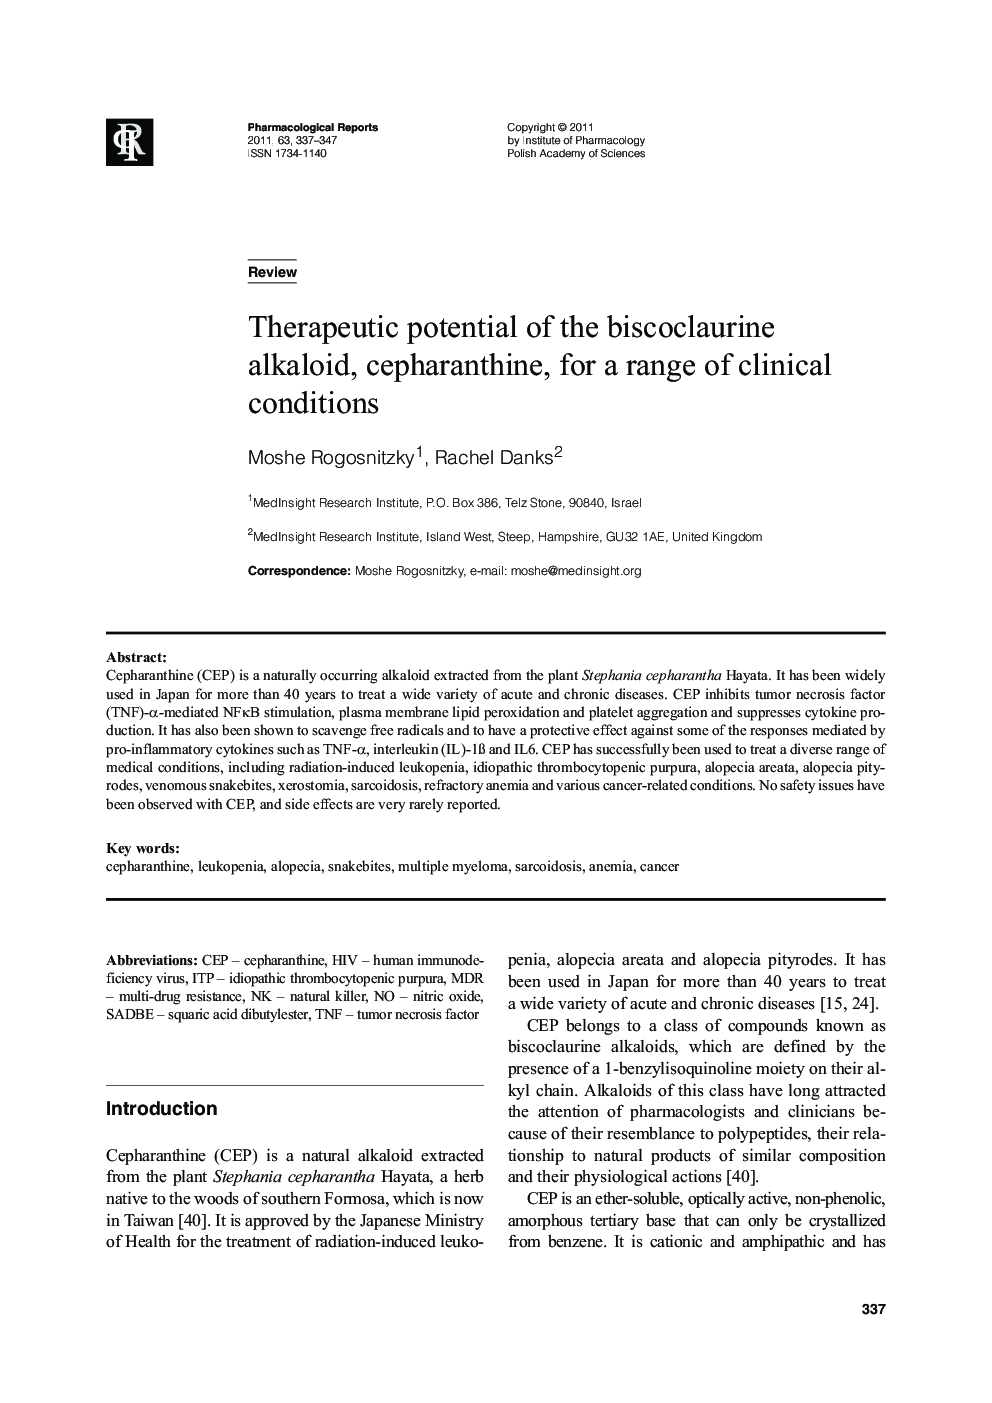 Therapeutic potential of the biscoclaurine alkaloid, cepharanthine, for a range of clinical conditions